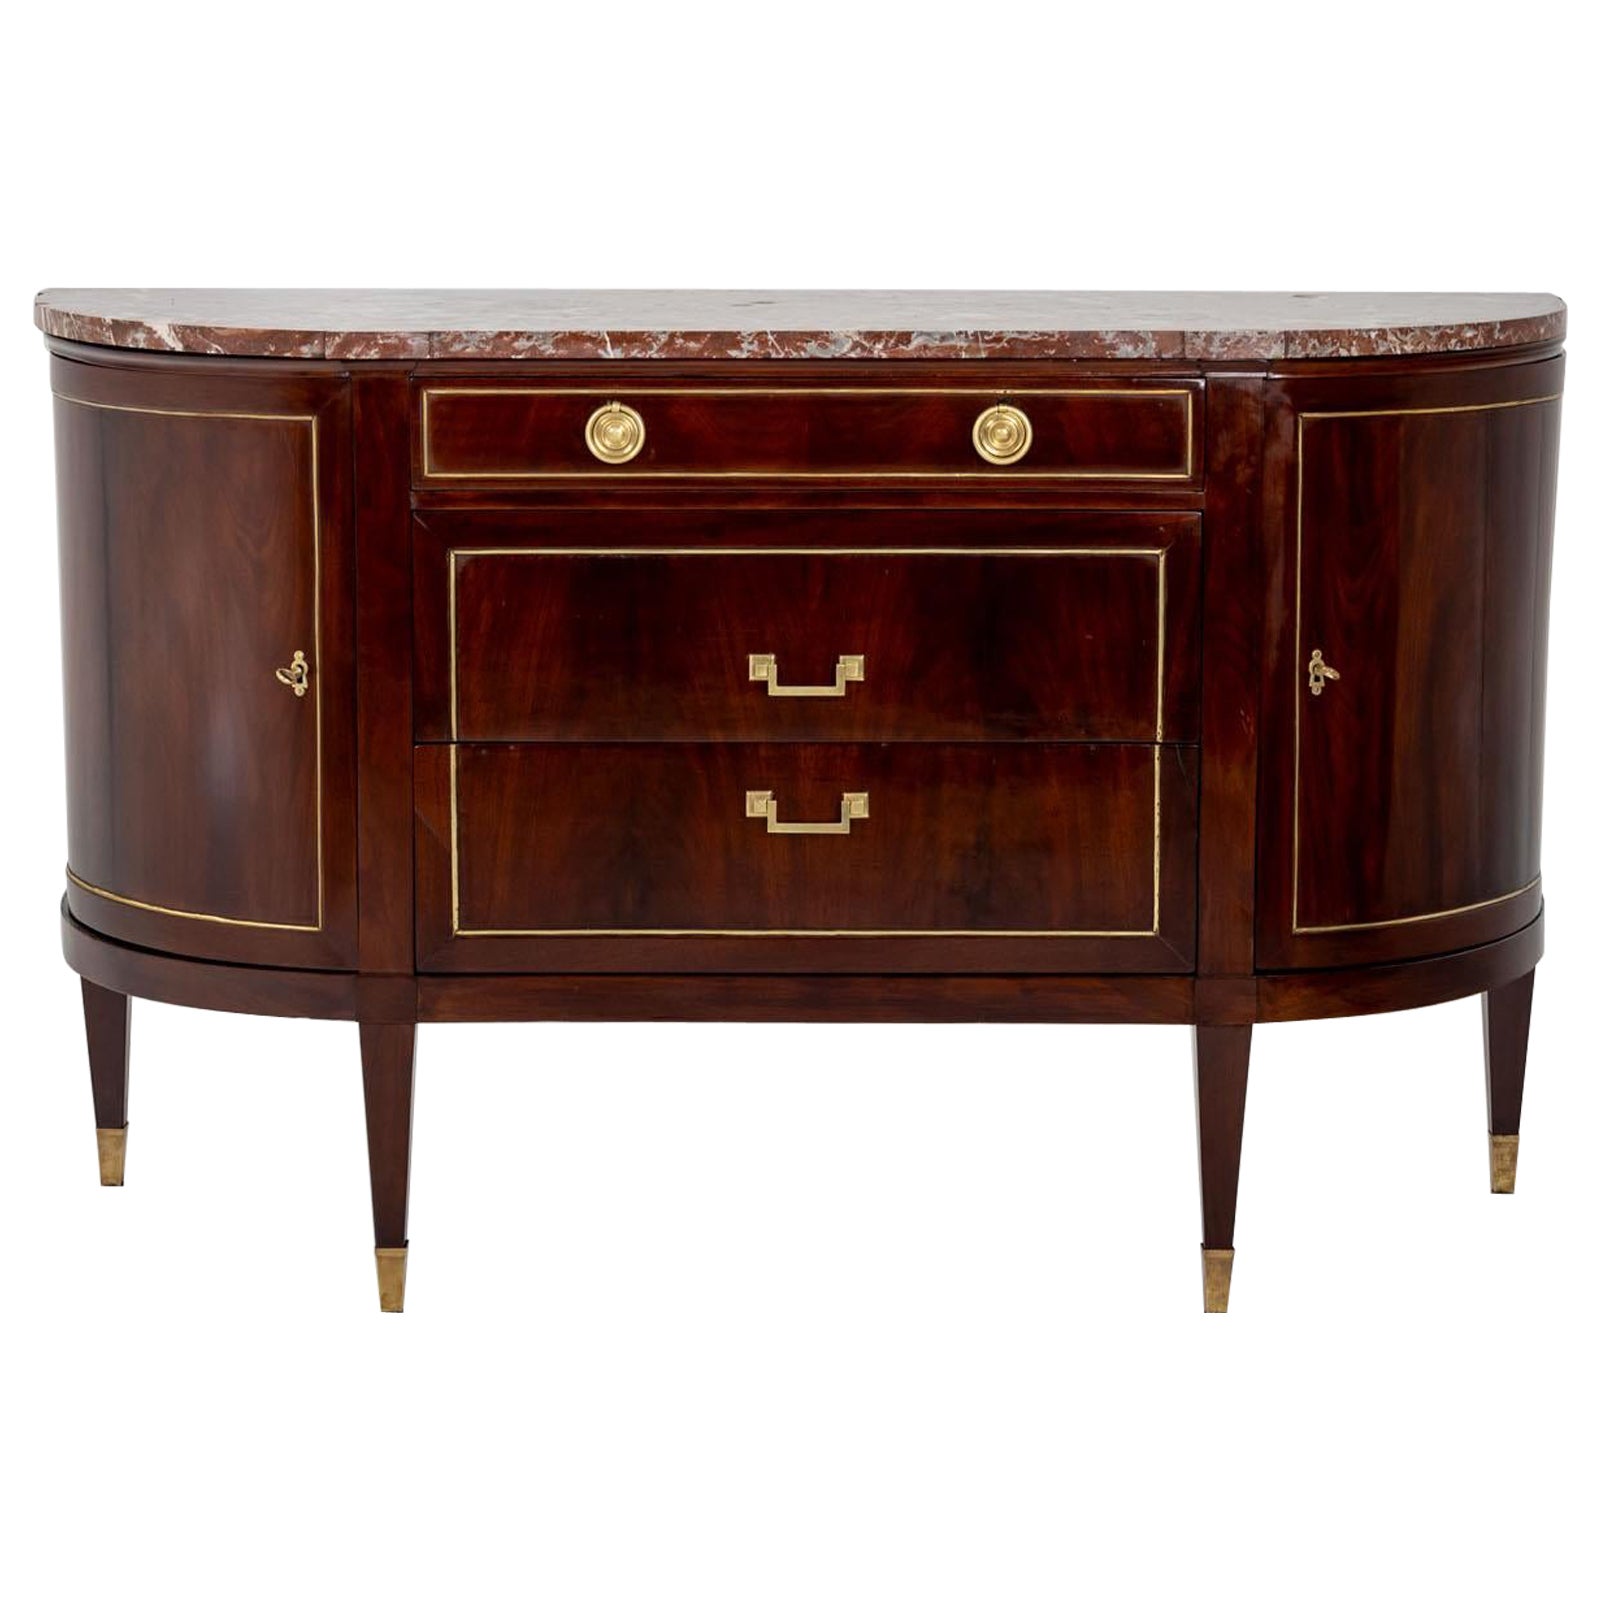 Louis Seize style sideboard, 19th century For Sale